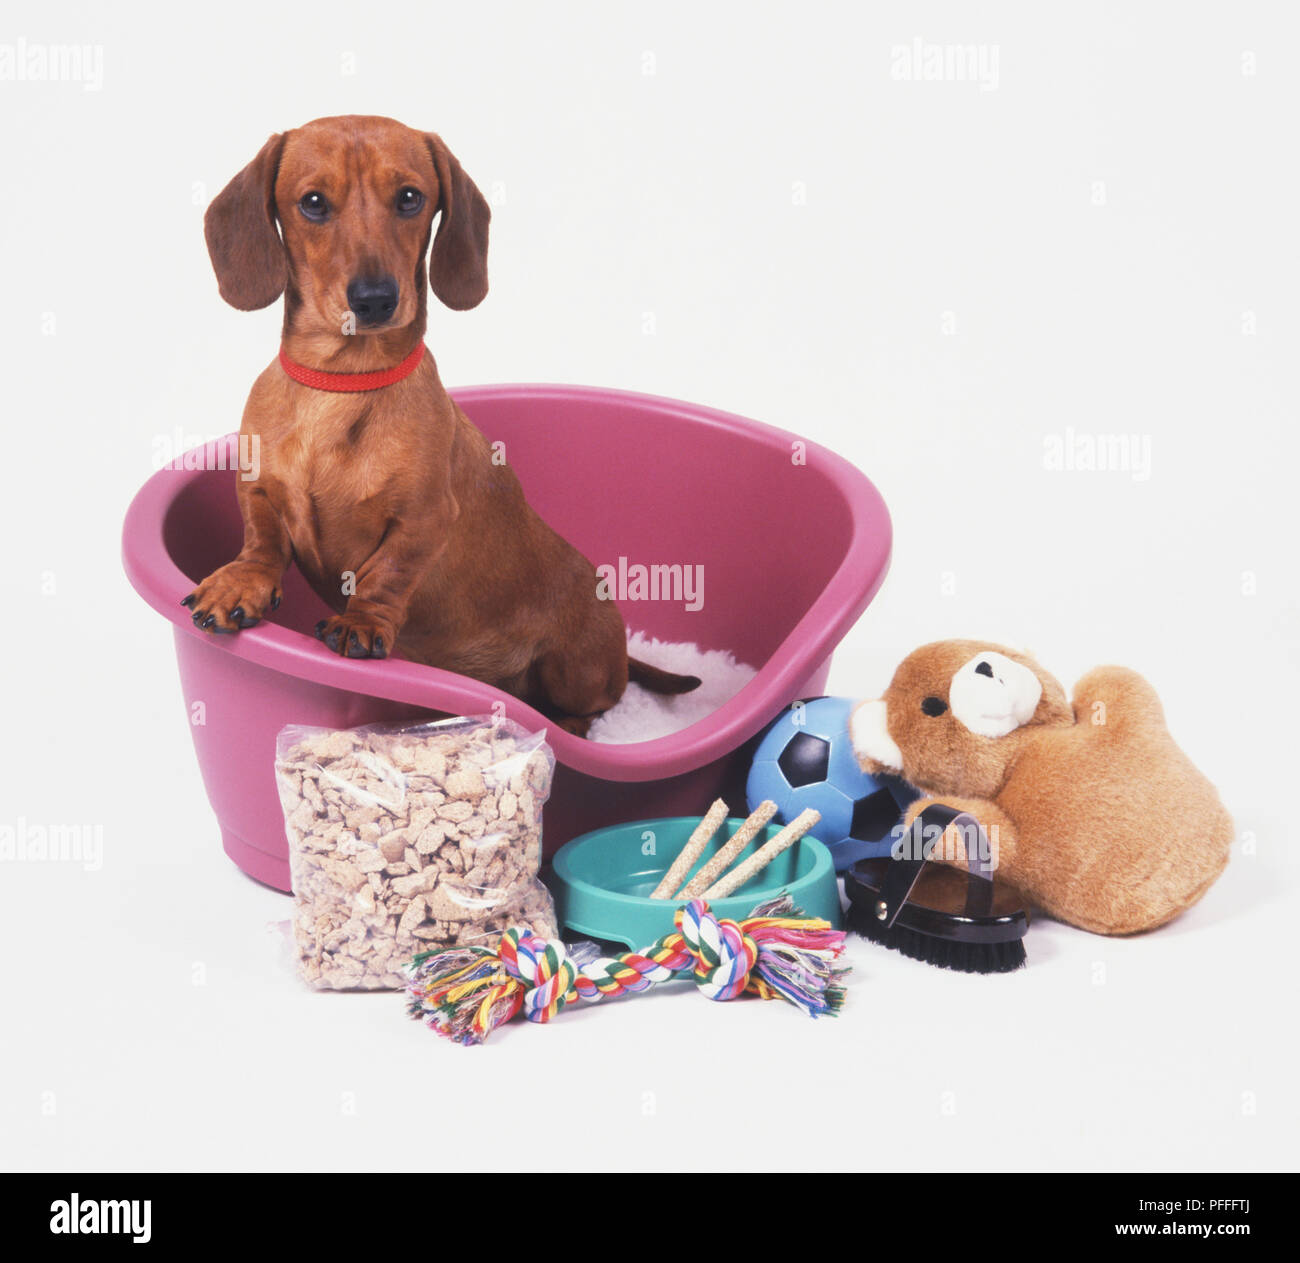 Dachshund (Canis familiaris) sitting up in a basket, surrounded by toys, a brush, a bowl and a packet of dry dog food Stock Photo